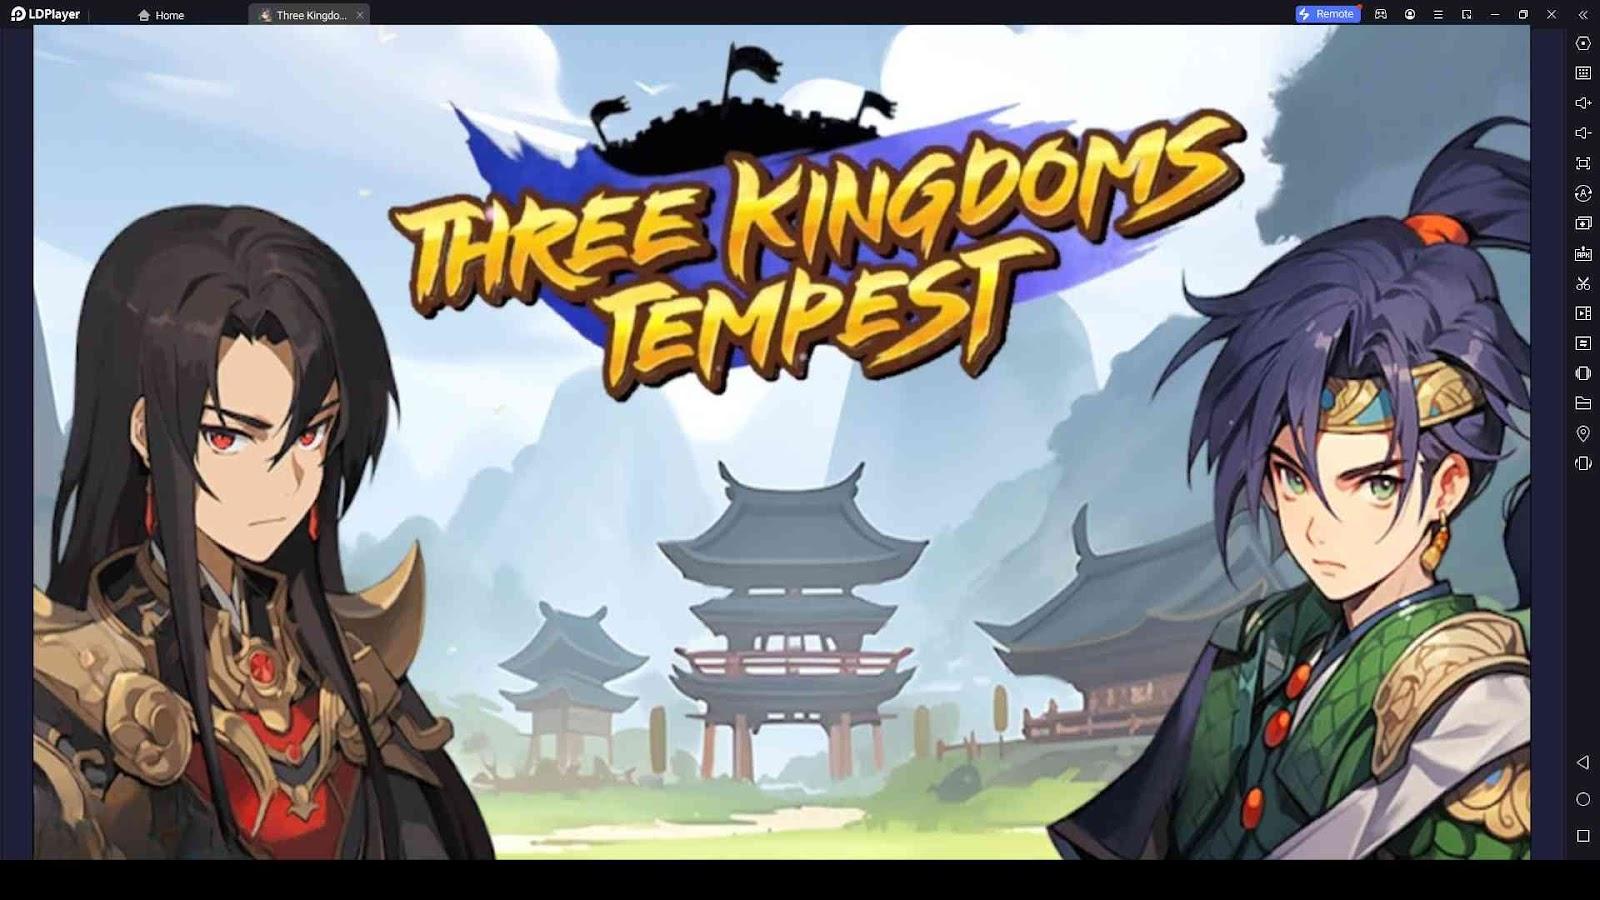 Ultimate Beginner's Guide to Three Kingdoms Tempest